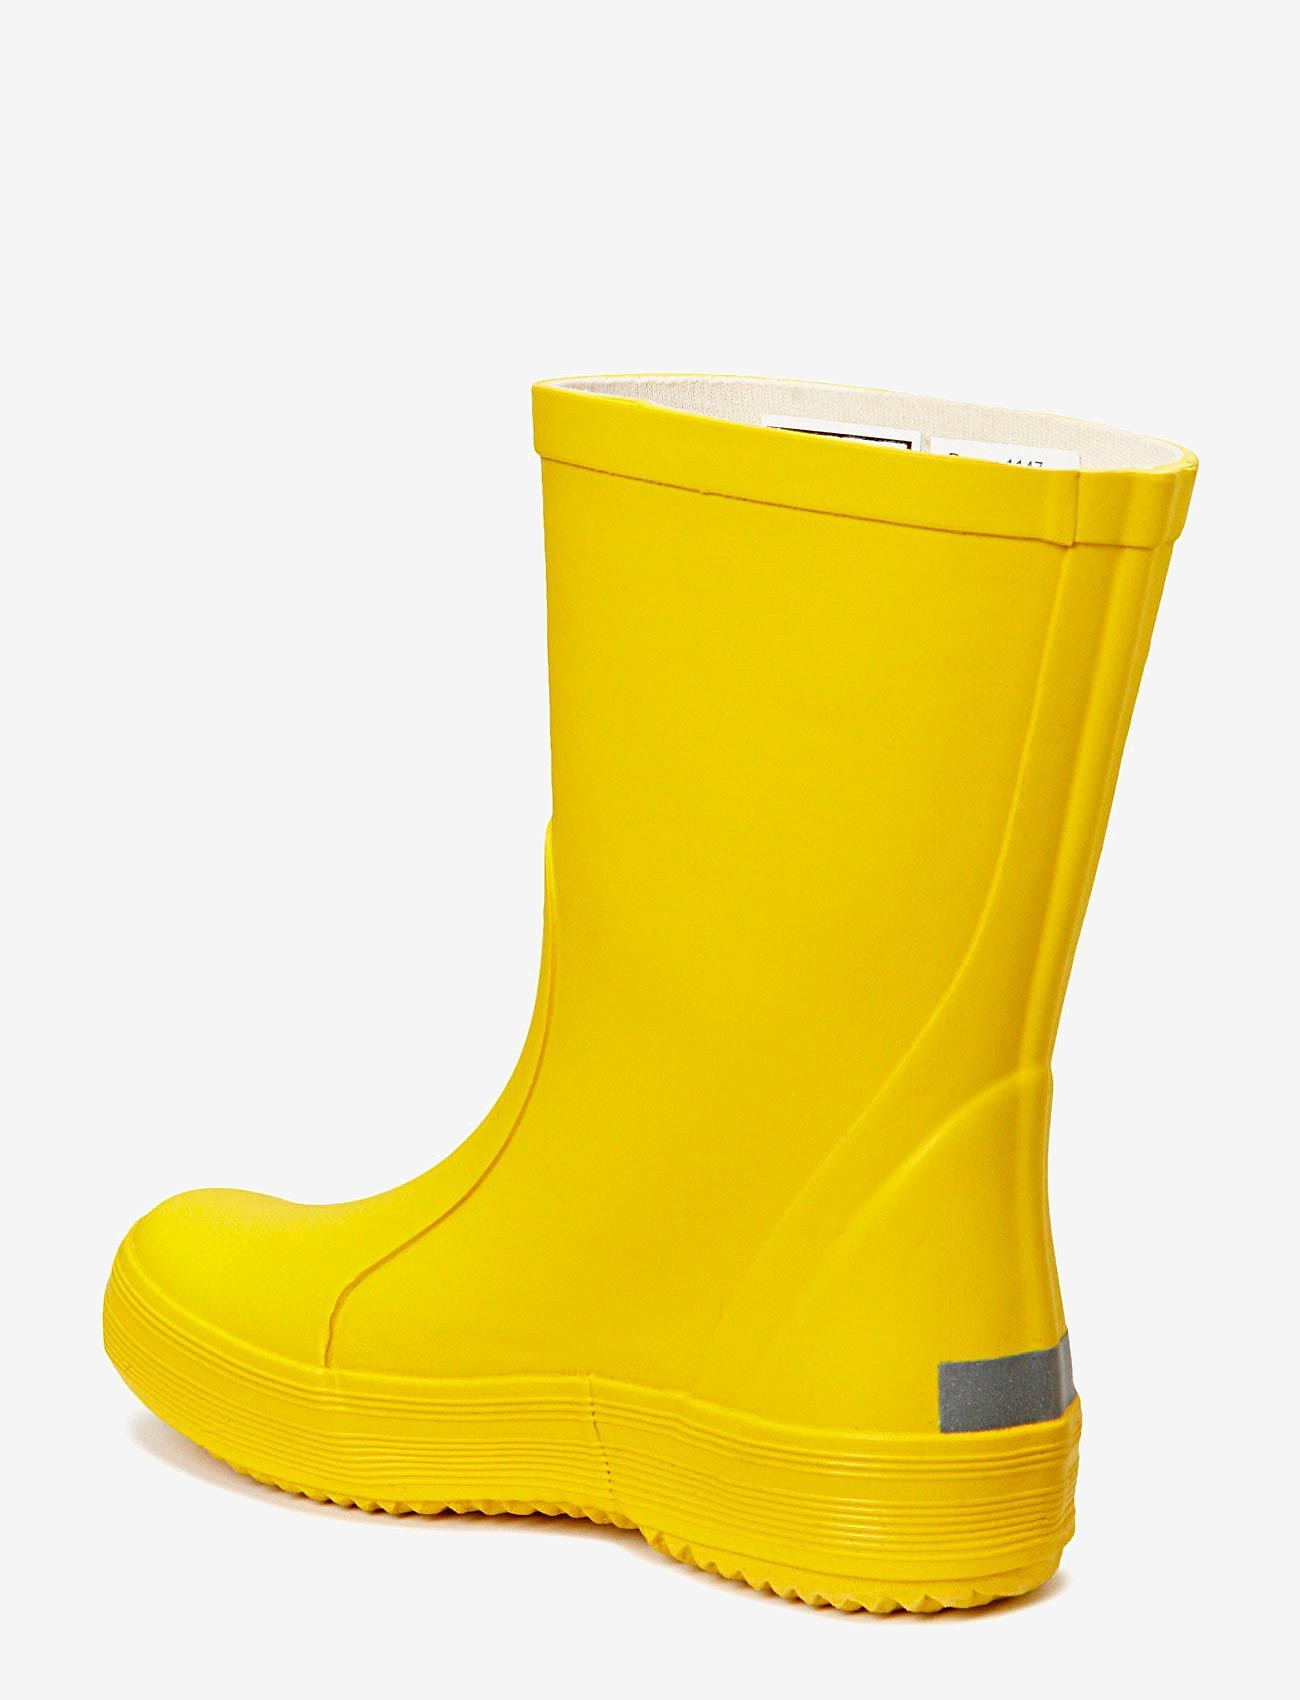 CeLaVi - Basic wellies -solid - unlined rubberboots - yellow - 1